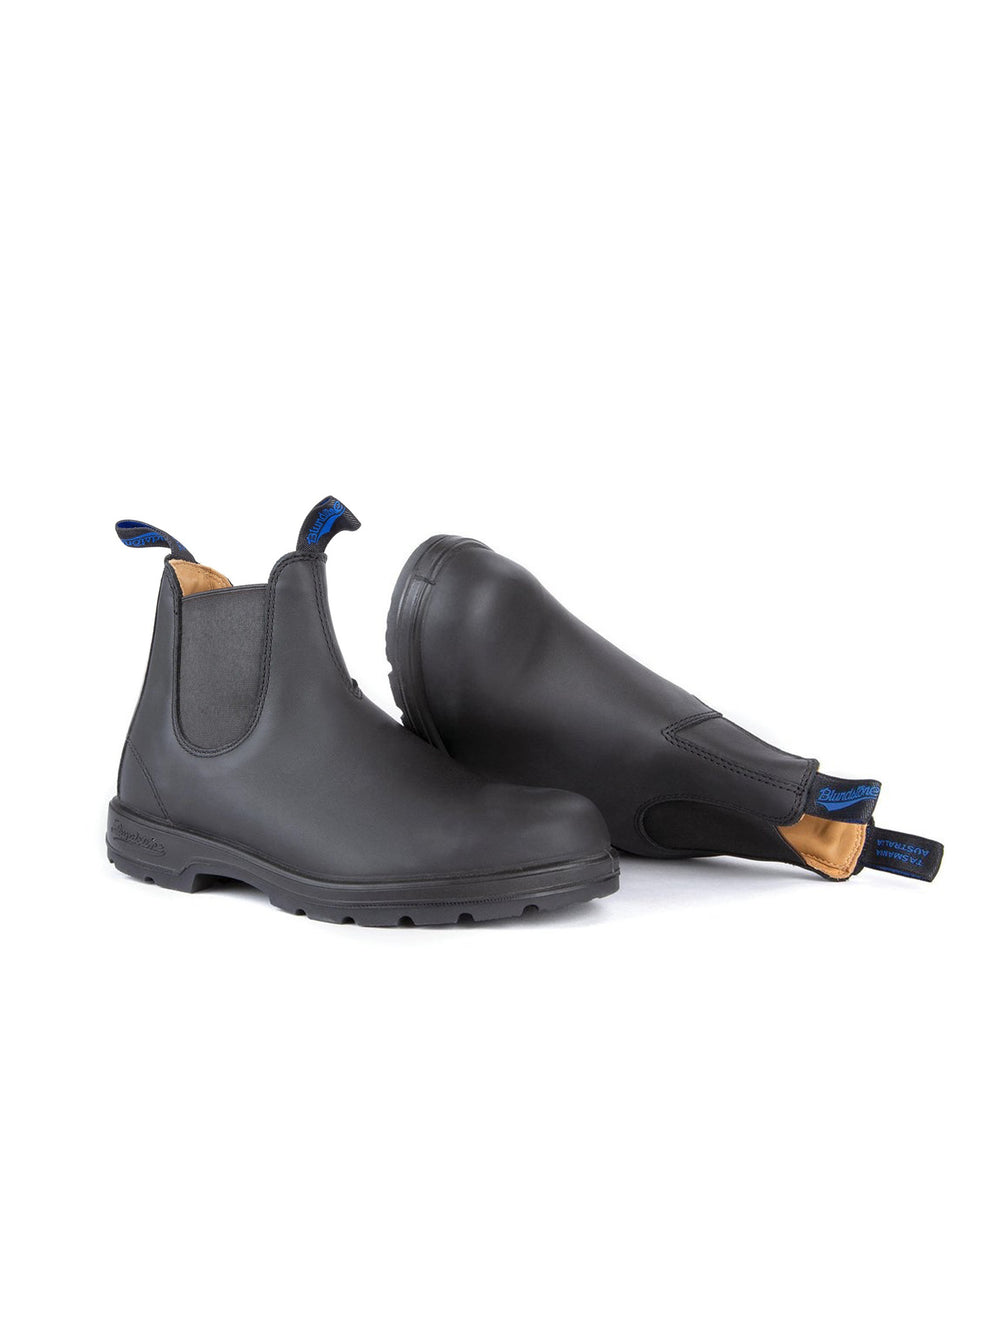 WOMENS BLUNDSTONE WINTER THERMAL CLASSIC BLACK